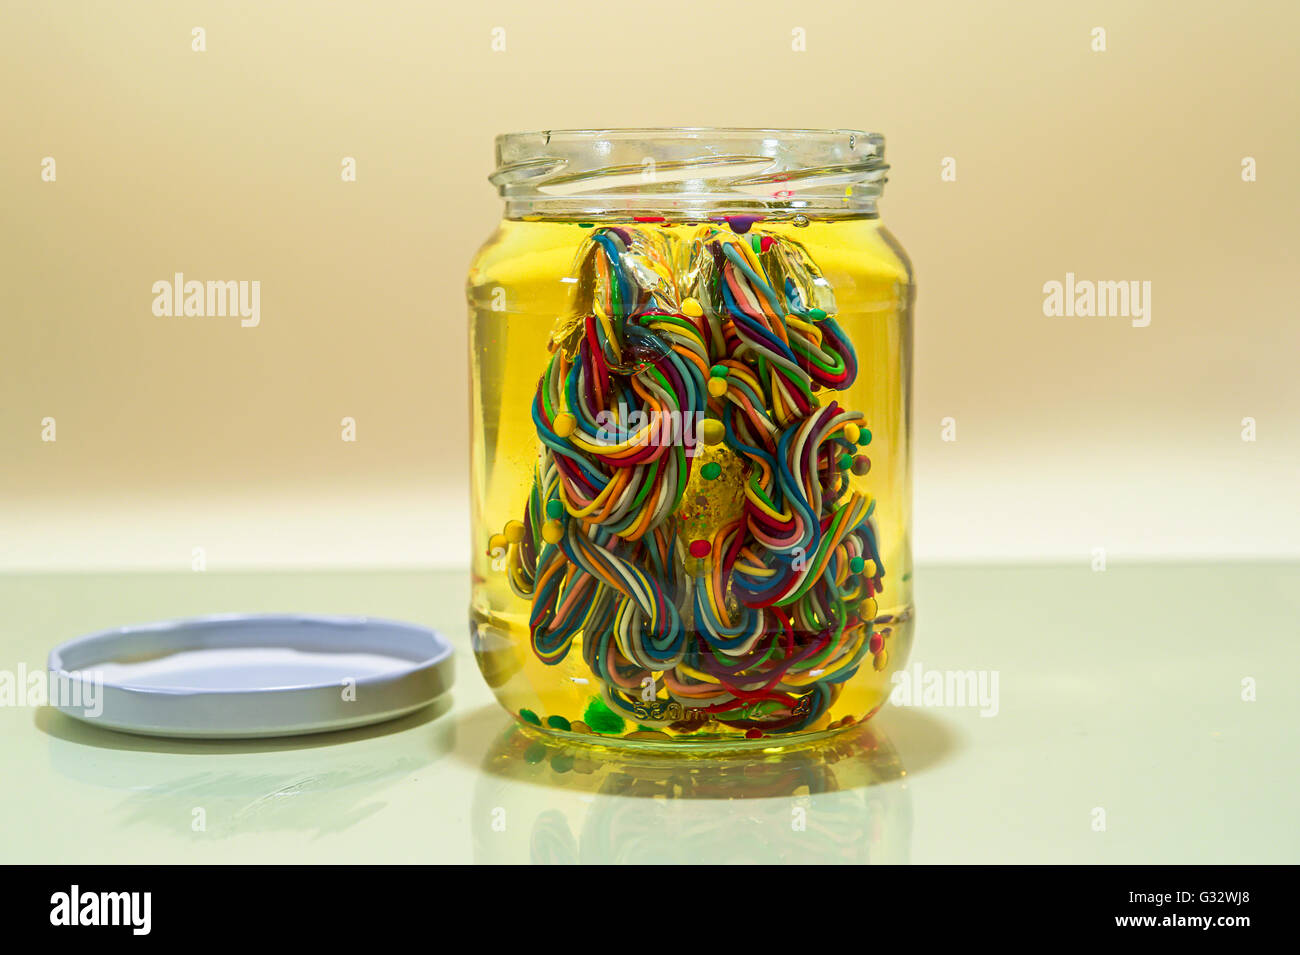 Conceptual brain in glass jar of oil made from multi coloured wires Stock Photo